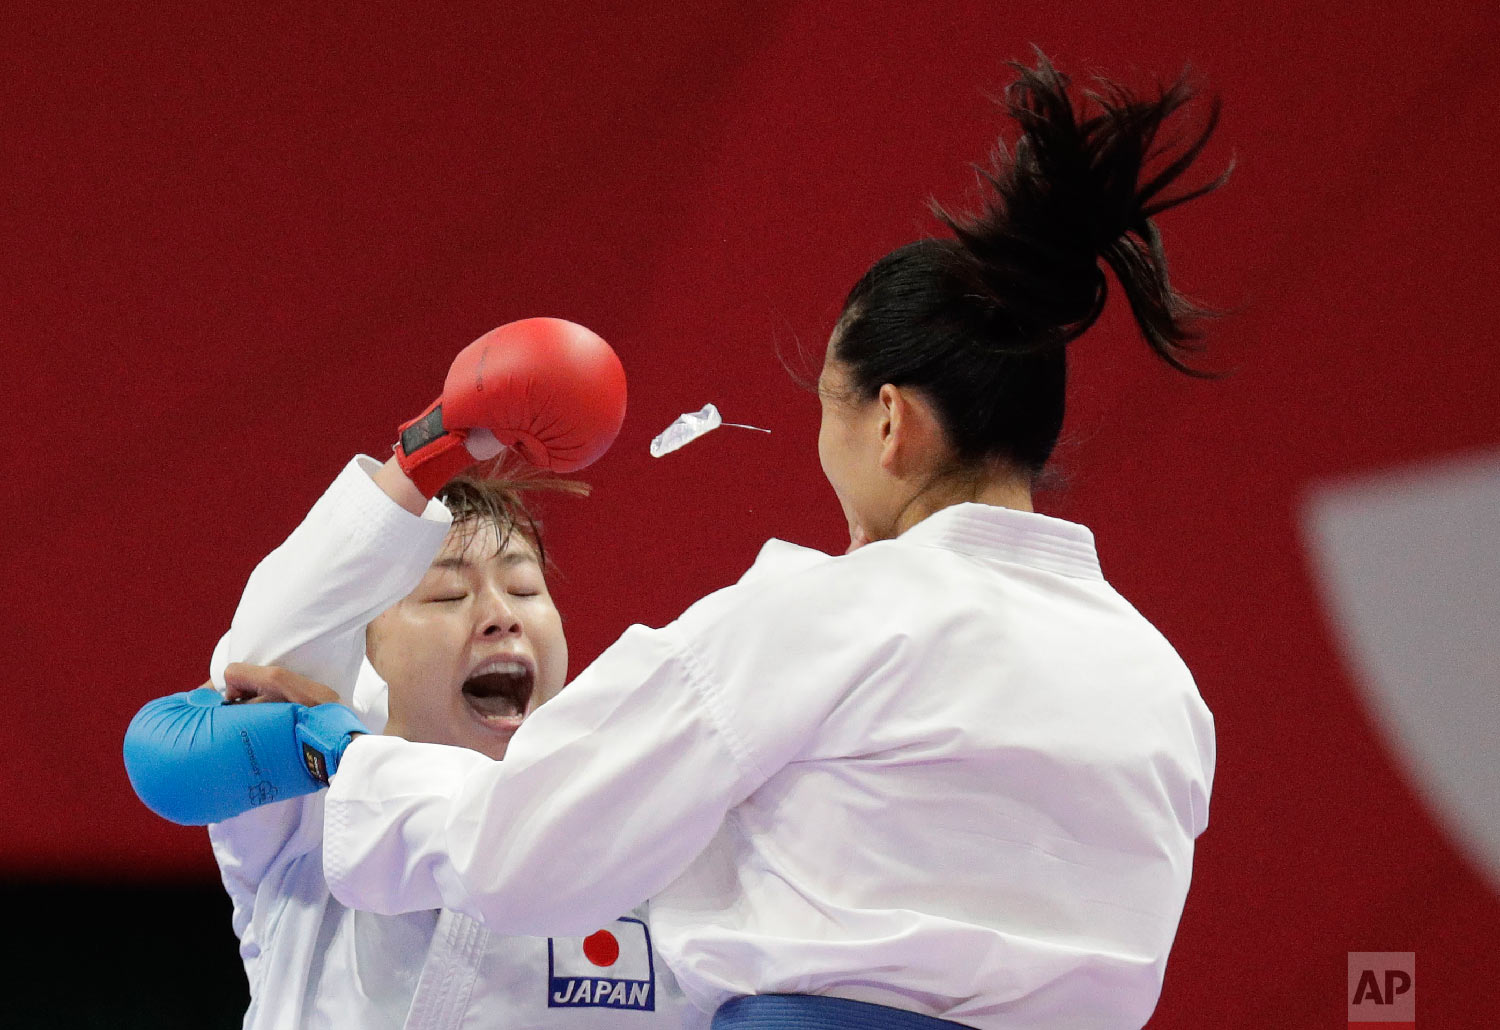  The mouthpiece of China's Mengmeng Gao, right, flies out during her fight with Japan's Ayumi Uekusa during their women's 68kg kumite karate at the 18th Asian Games in Jakarta, Indonesia, Saturday, Aug. 25, 2018. Uekusa won the gold. (AP Photo/Aaron 